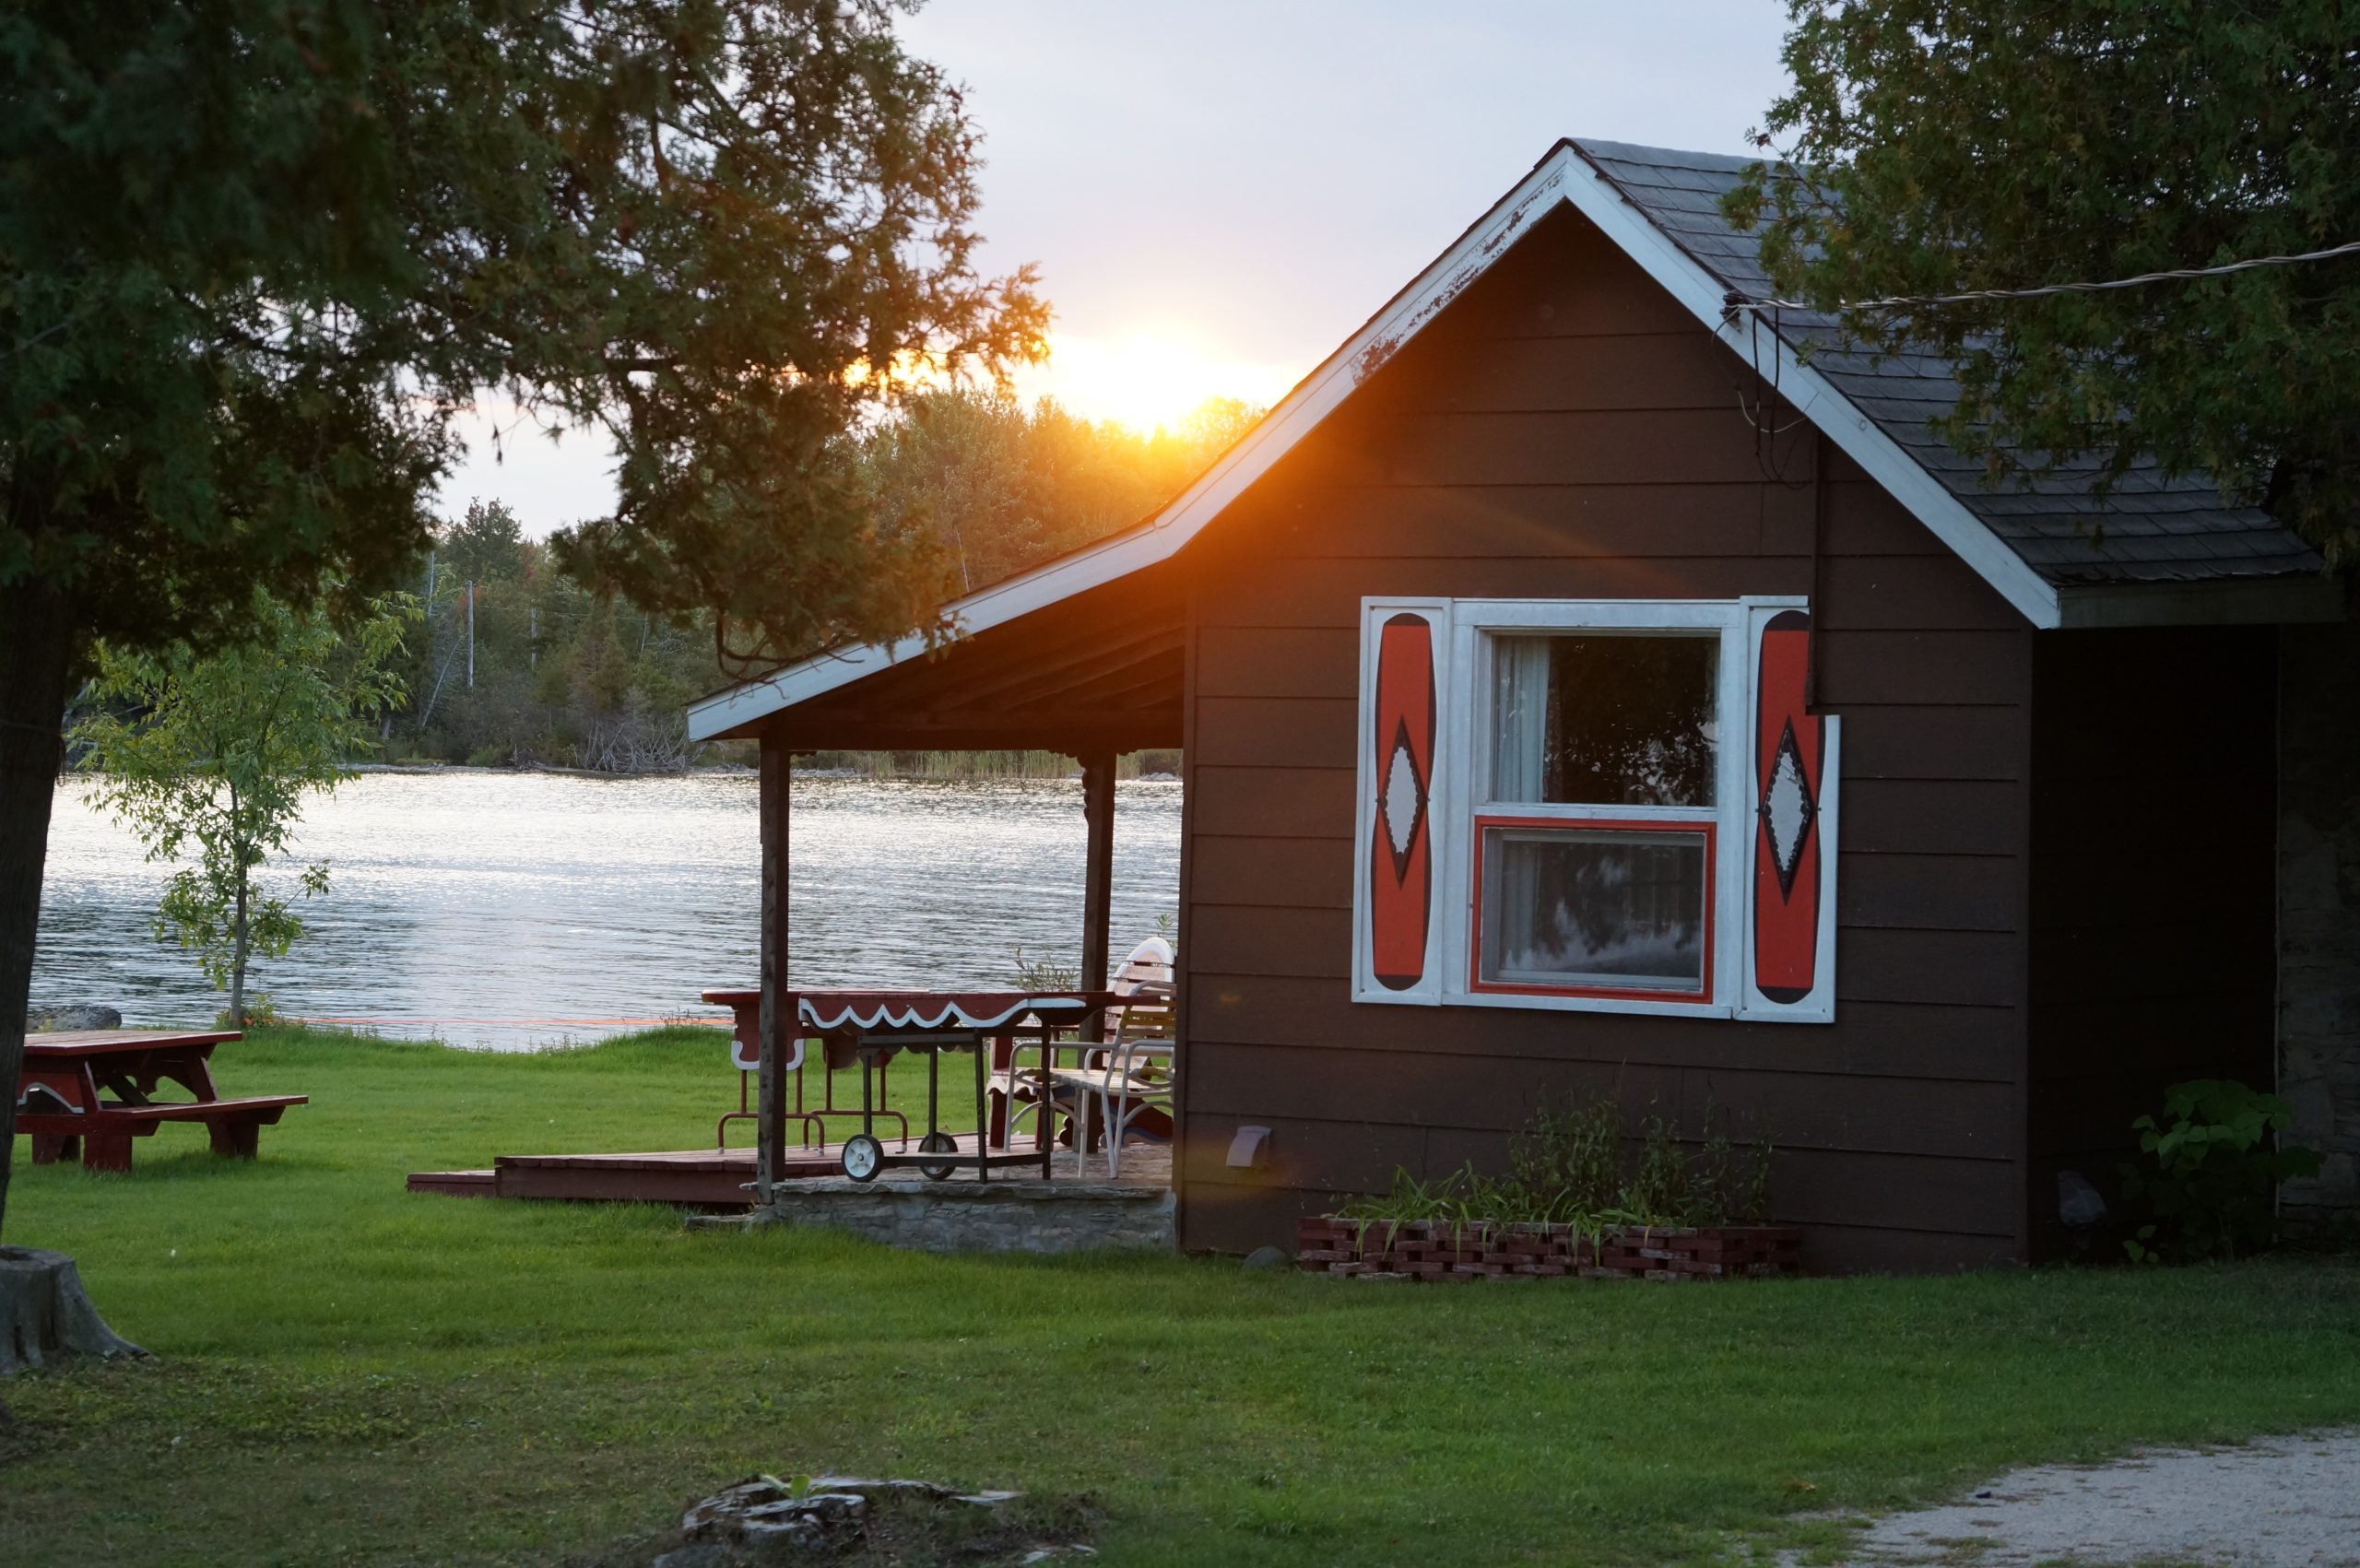 Picture of Cottage "Grandview" by the water.